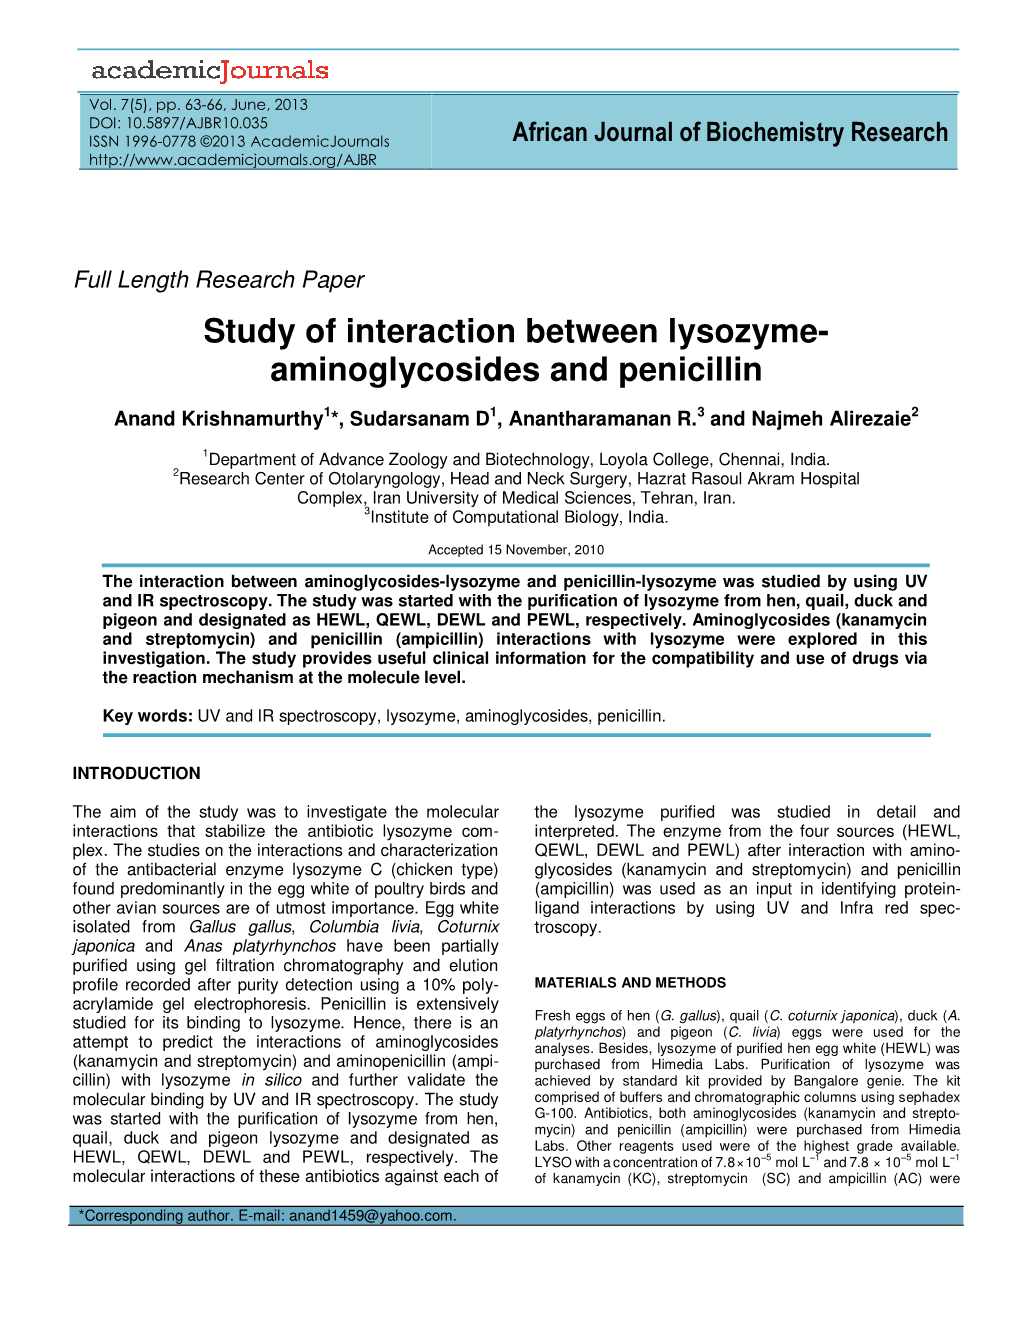 Study of Interaction Between Lysozyme- Aminoglycosides and Penicillin